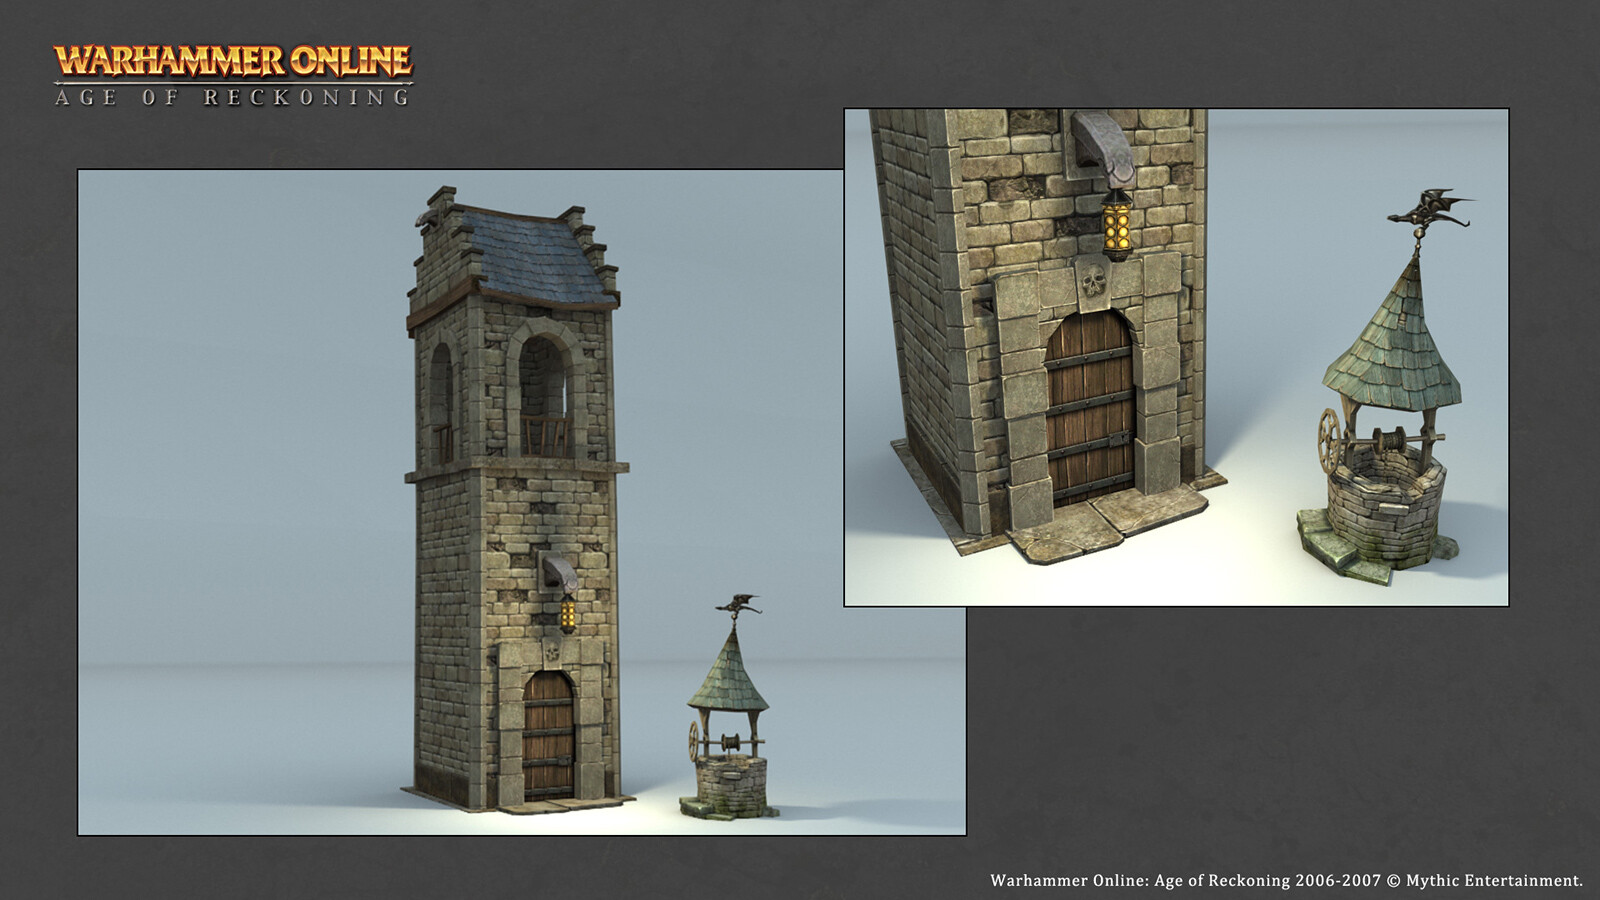 Empire Watch Tower and Well asset created for Warhammer Online. (Diffuse and Specular maps only)